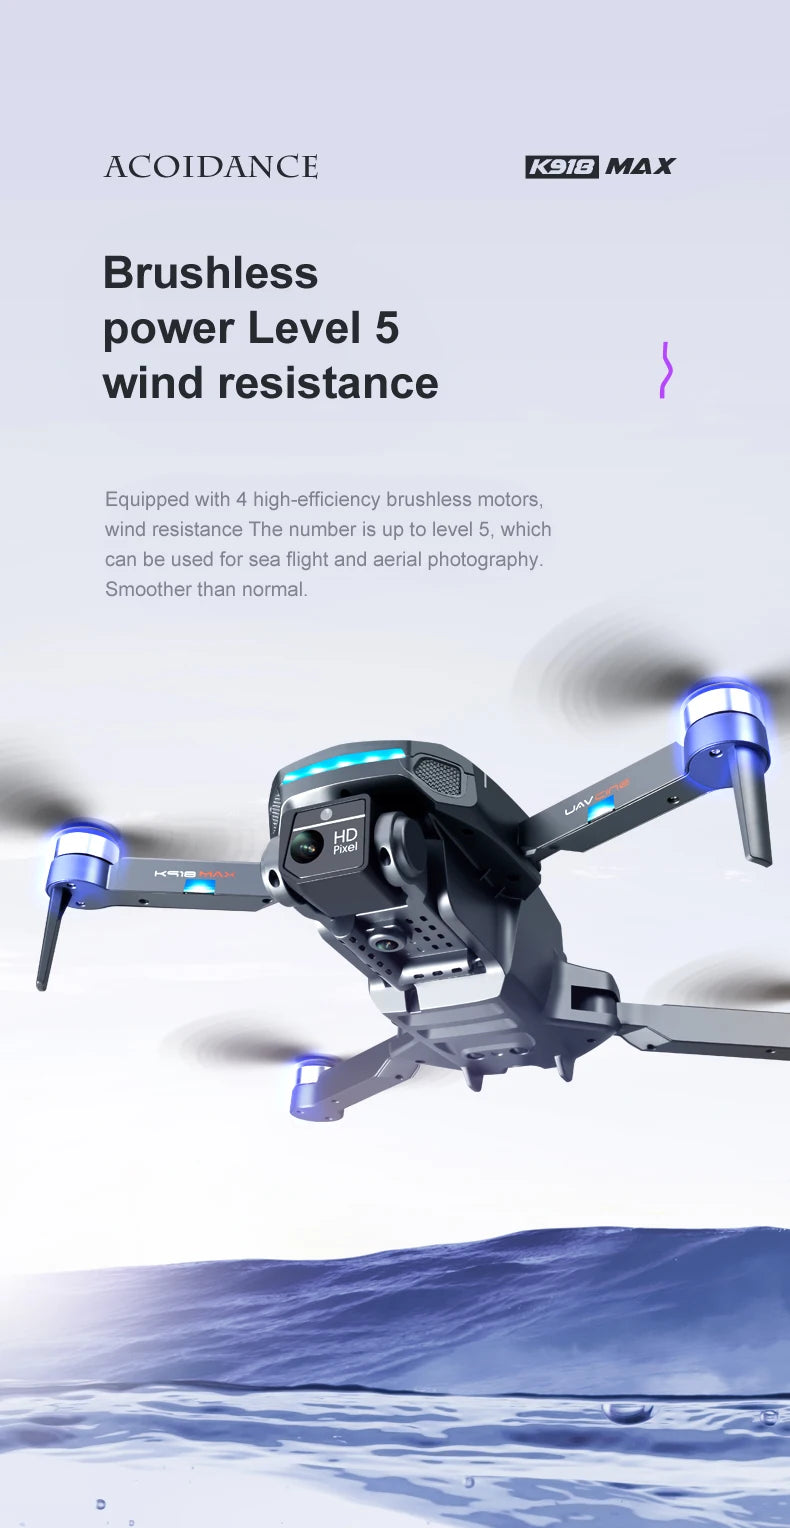 XYRC K918 MAX GPS Drone, ACOIDANCE K91O MAX Brushless power Level 5 wind resistance Smoother than